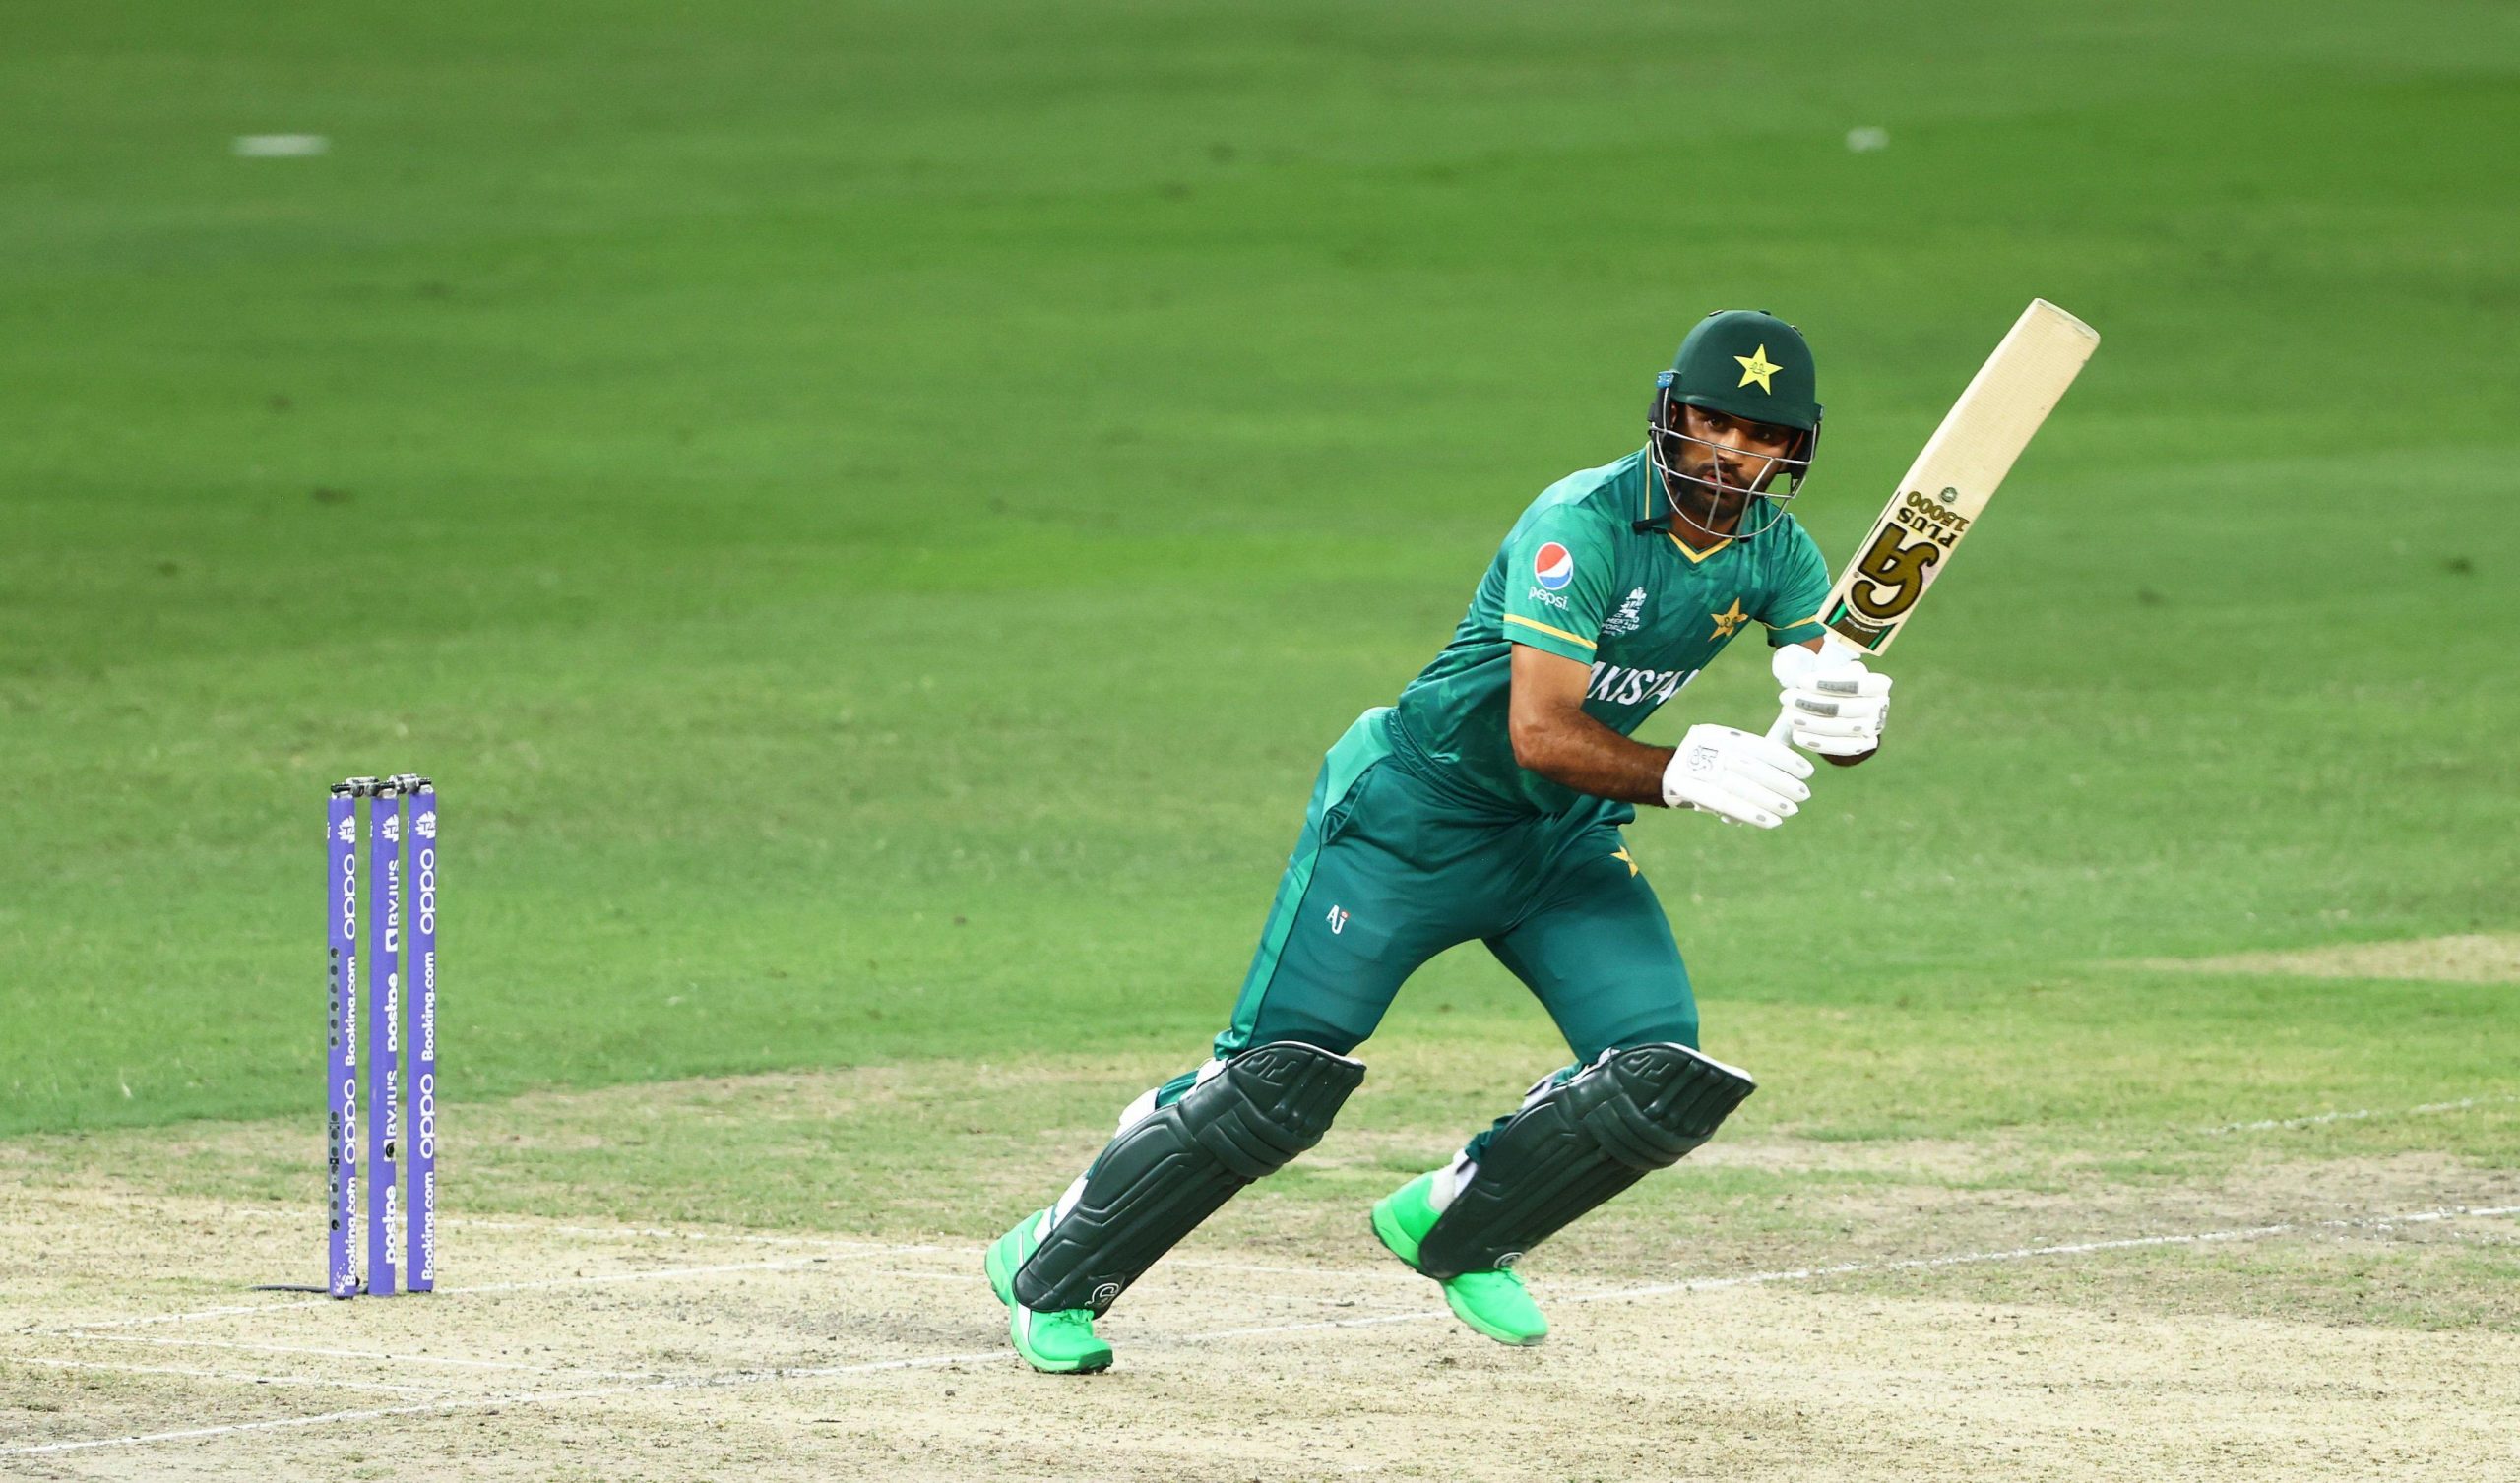 Asia Cup 2022: Pakistans Fakhar Zaman earns praise for walking off before umpires call